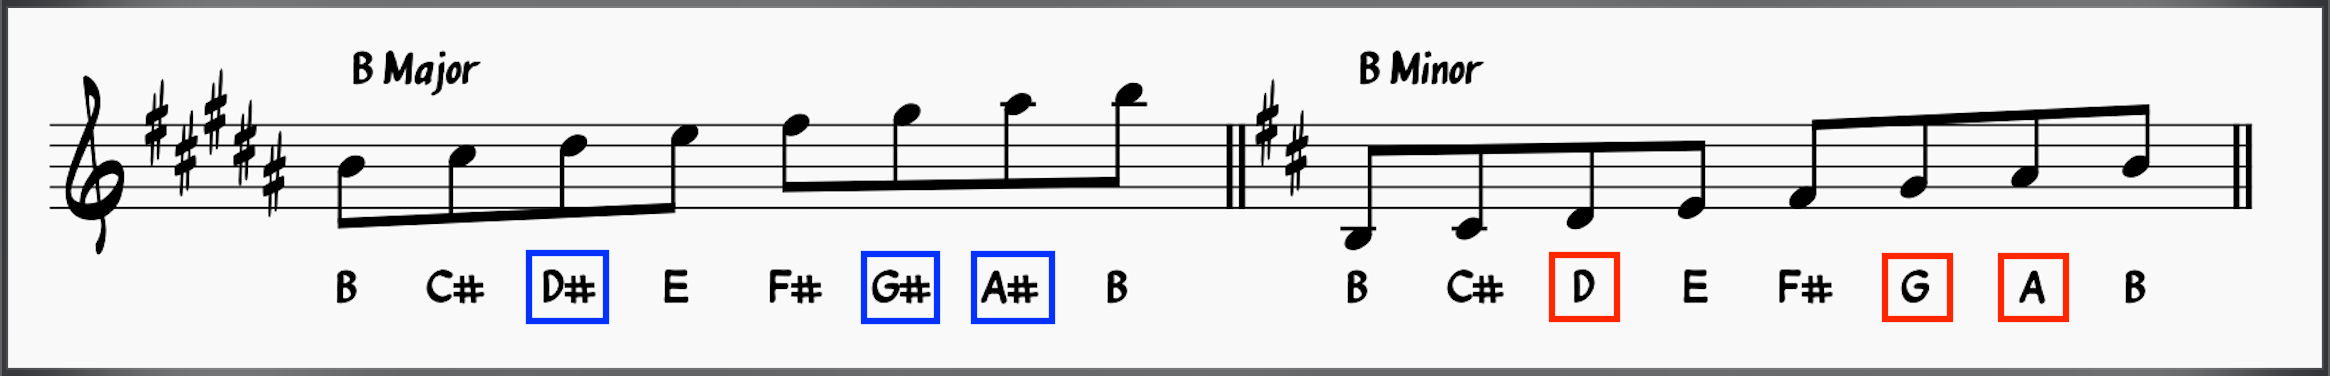 B major scale and B Minor scale